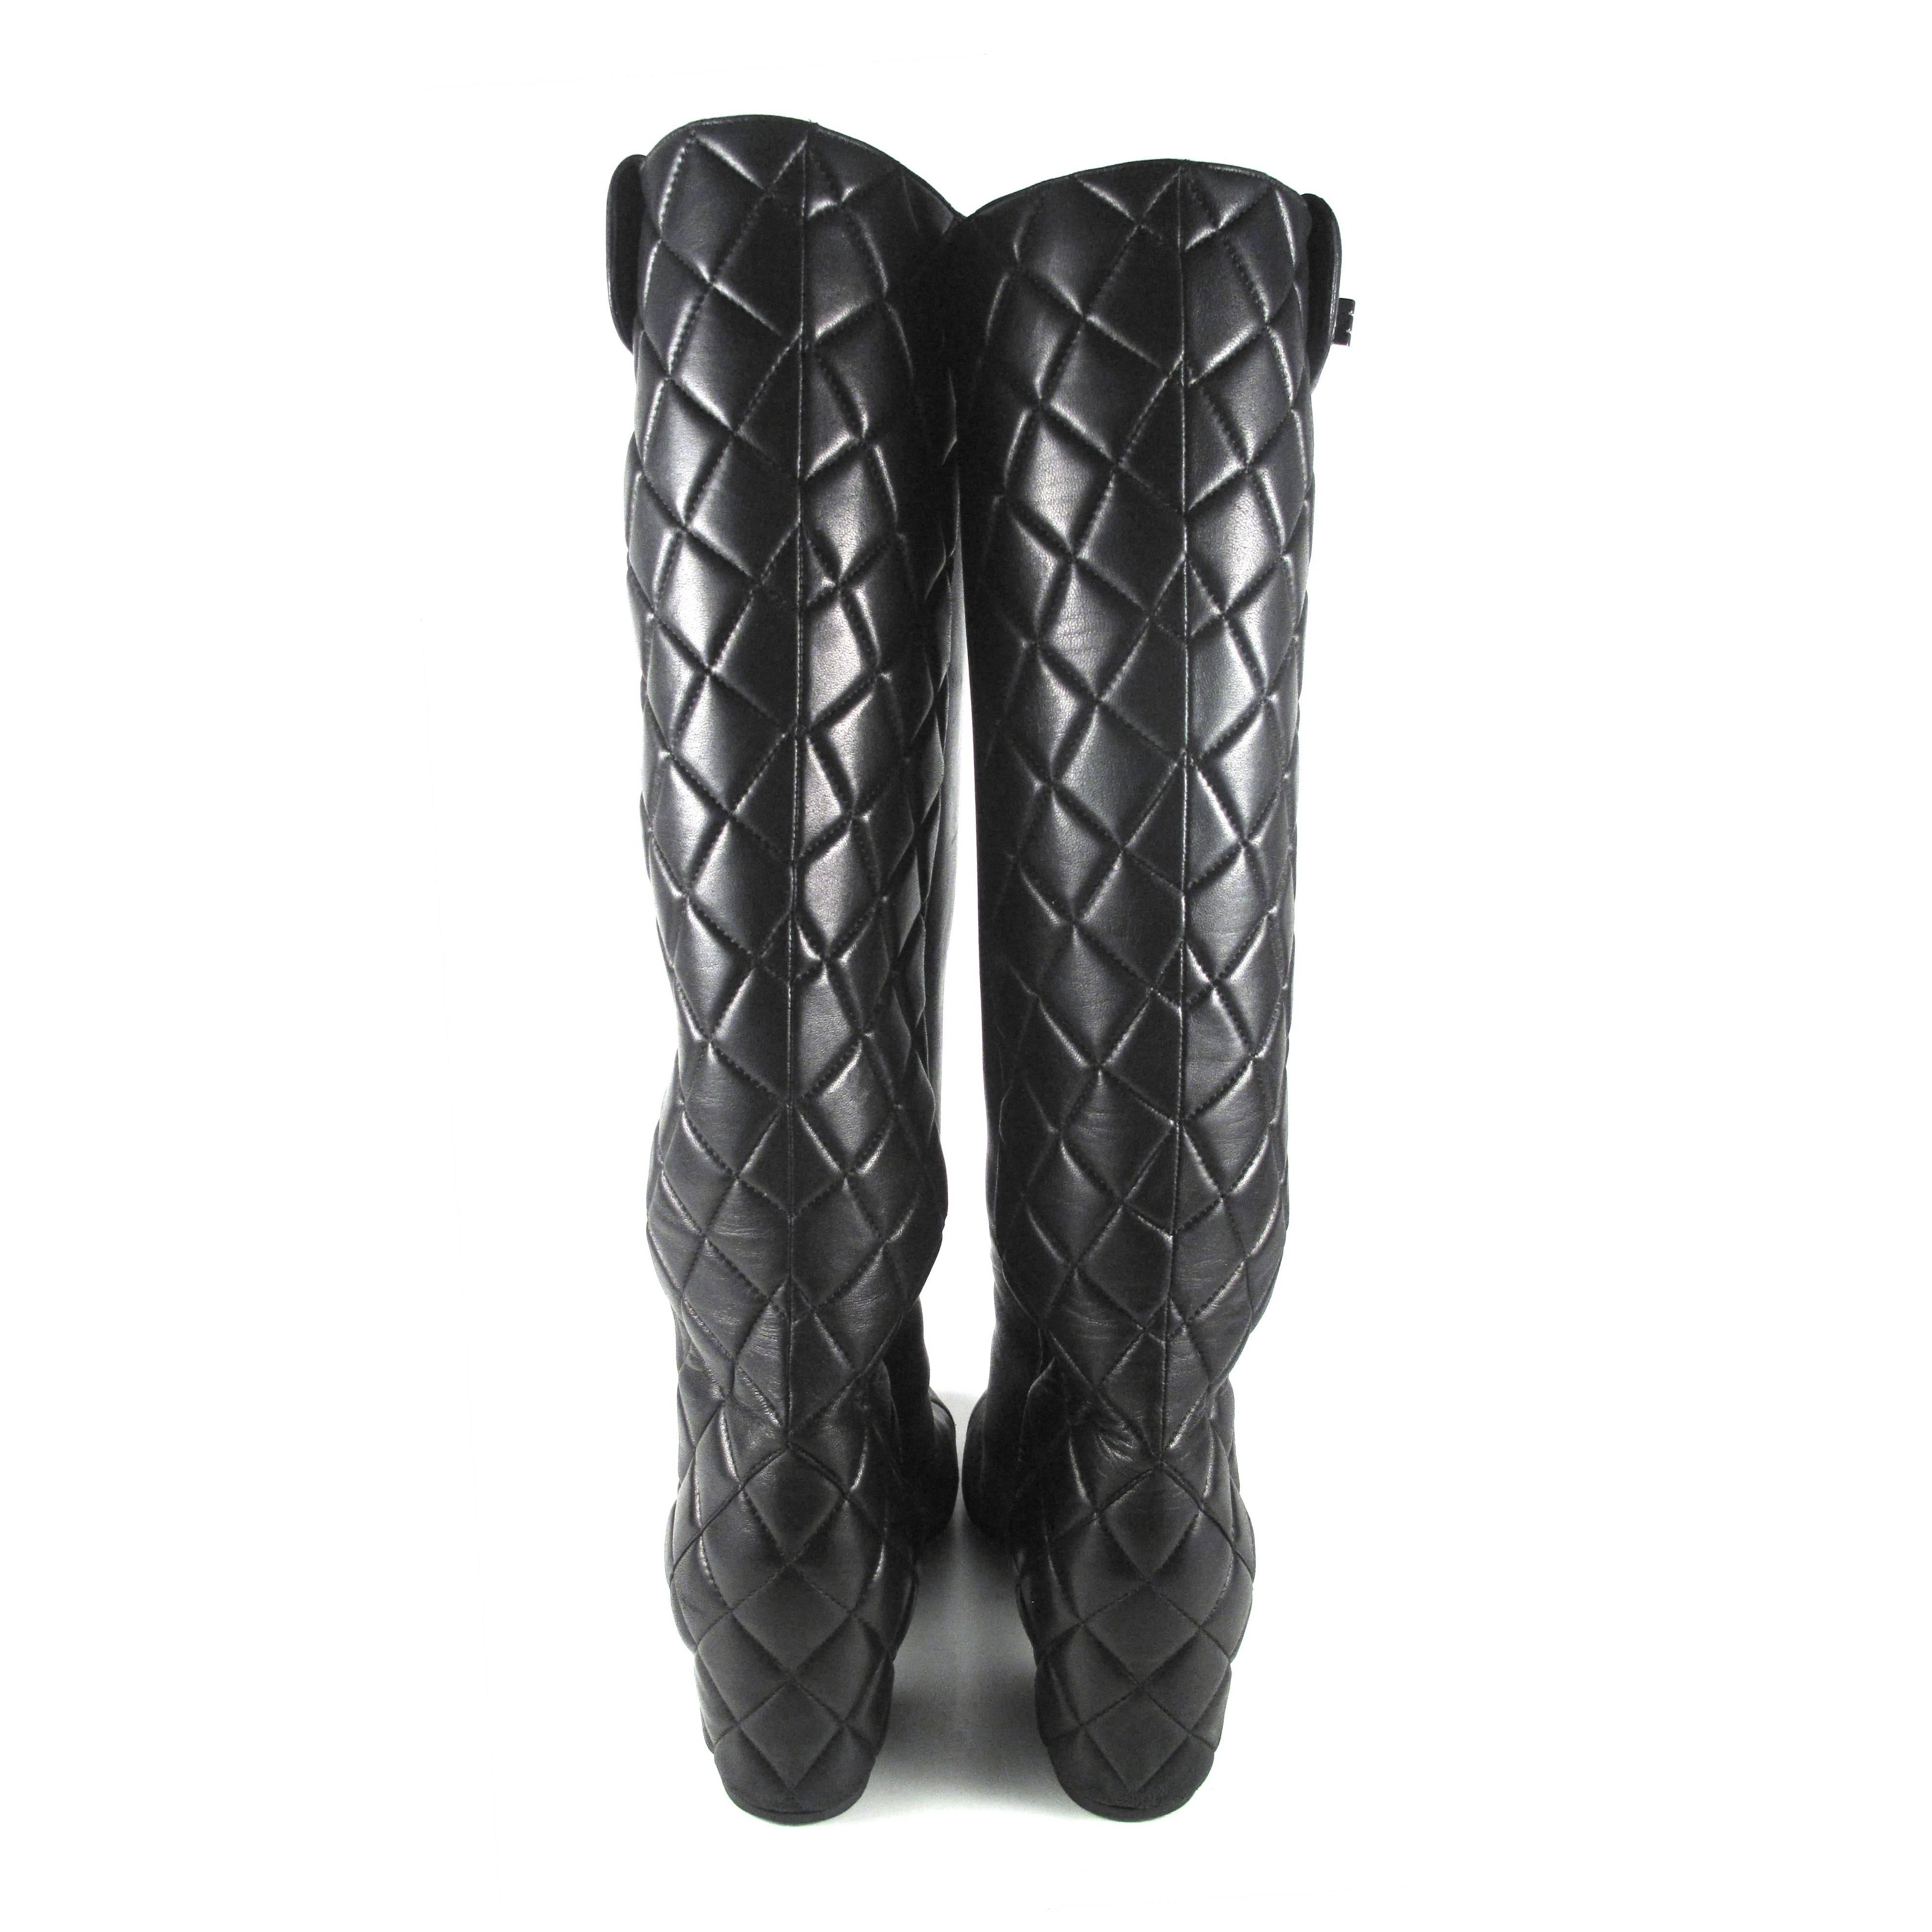 Women's Chanel Boots 6.5 7 36.5 37 Black Quilted Leather Knee High Turn Lock Silver CC